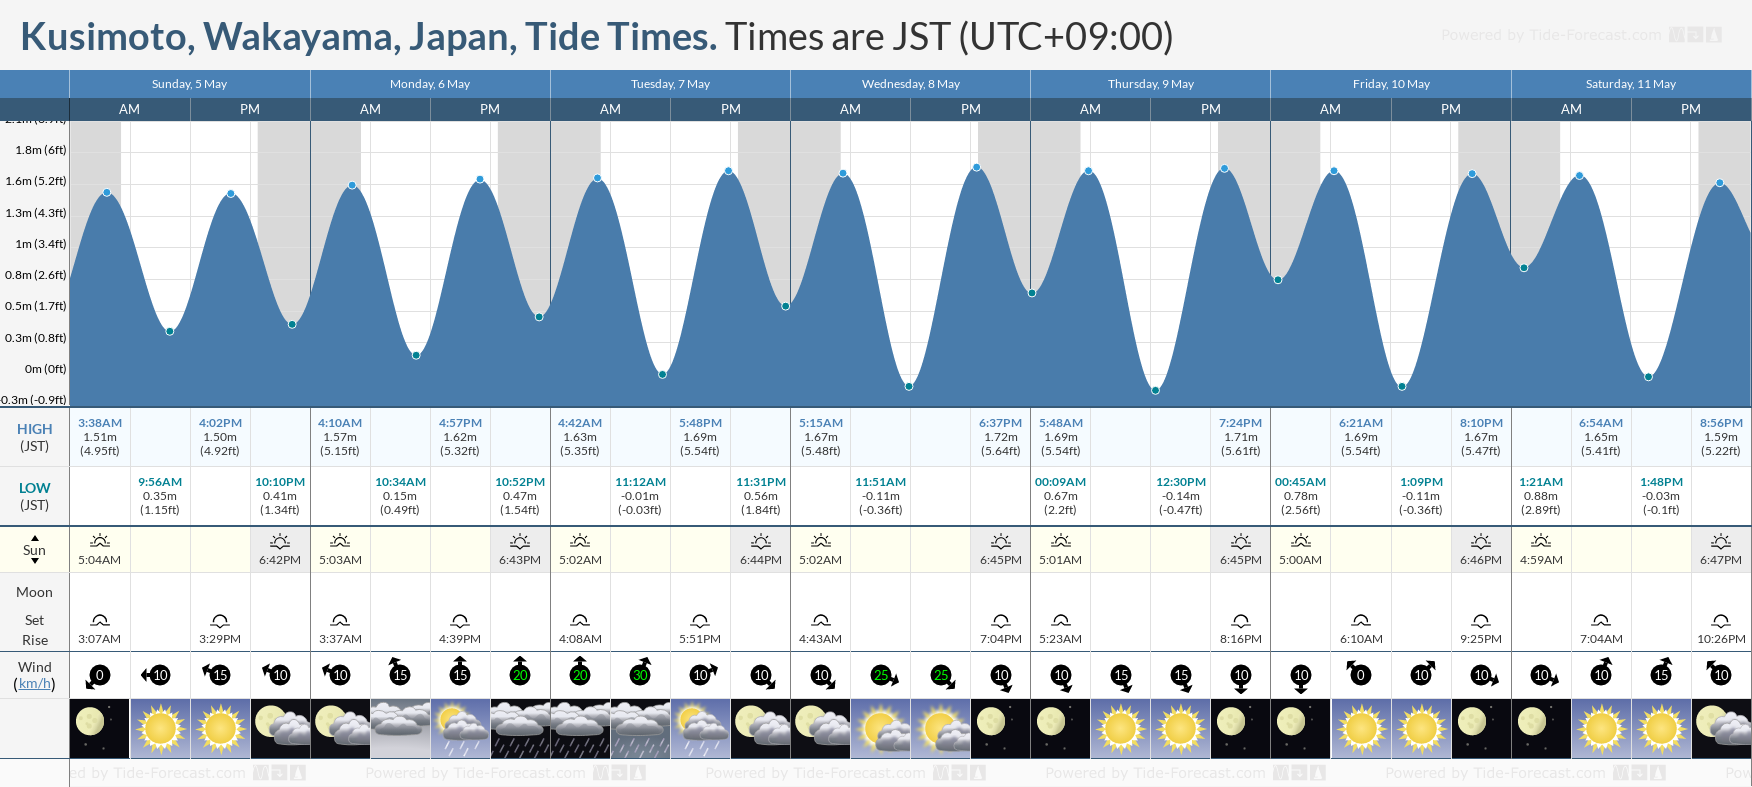 Kusimoto, Wakayama, Japan Tide Chart including high and low tide tide times for the next 7 days